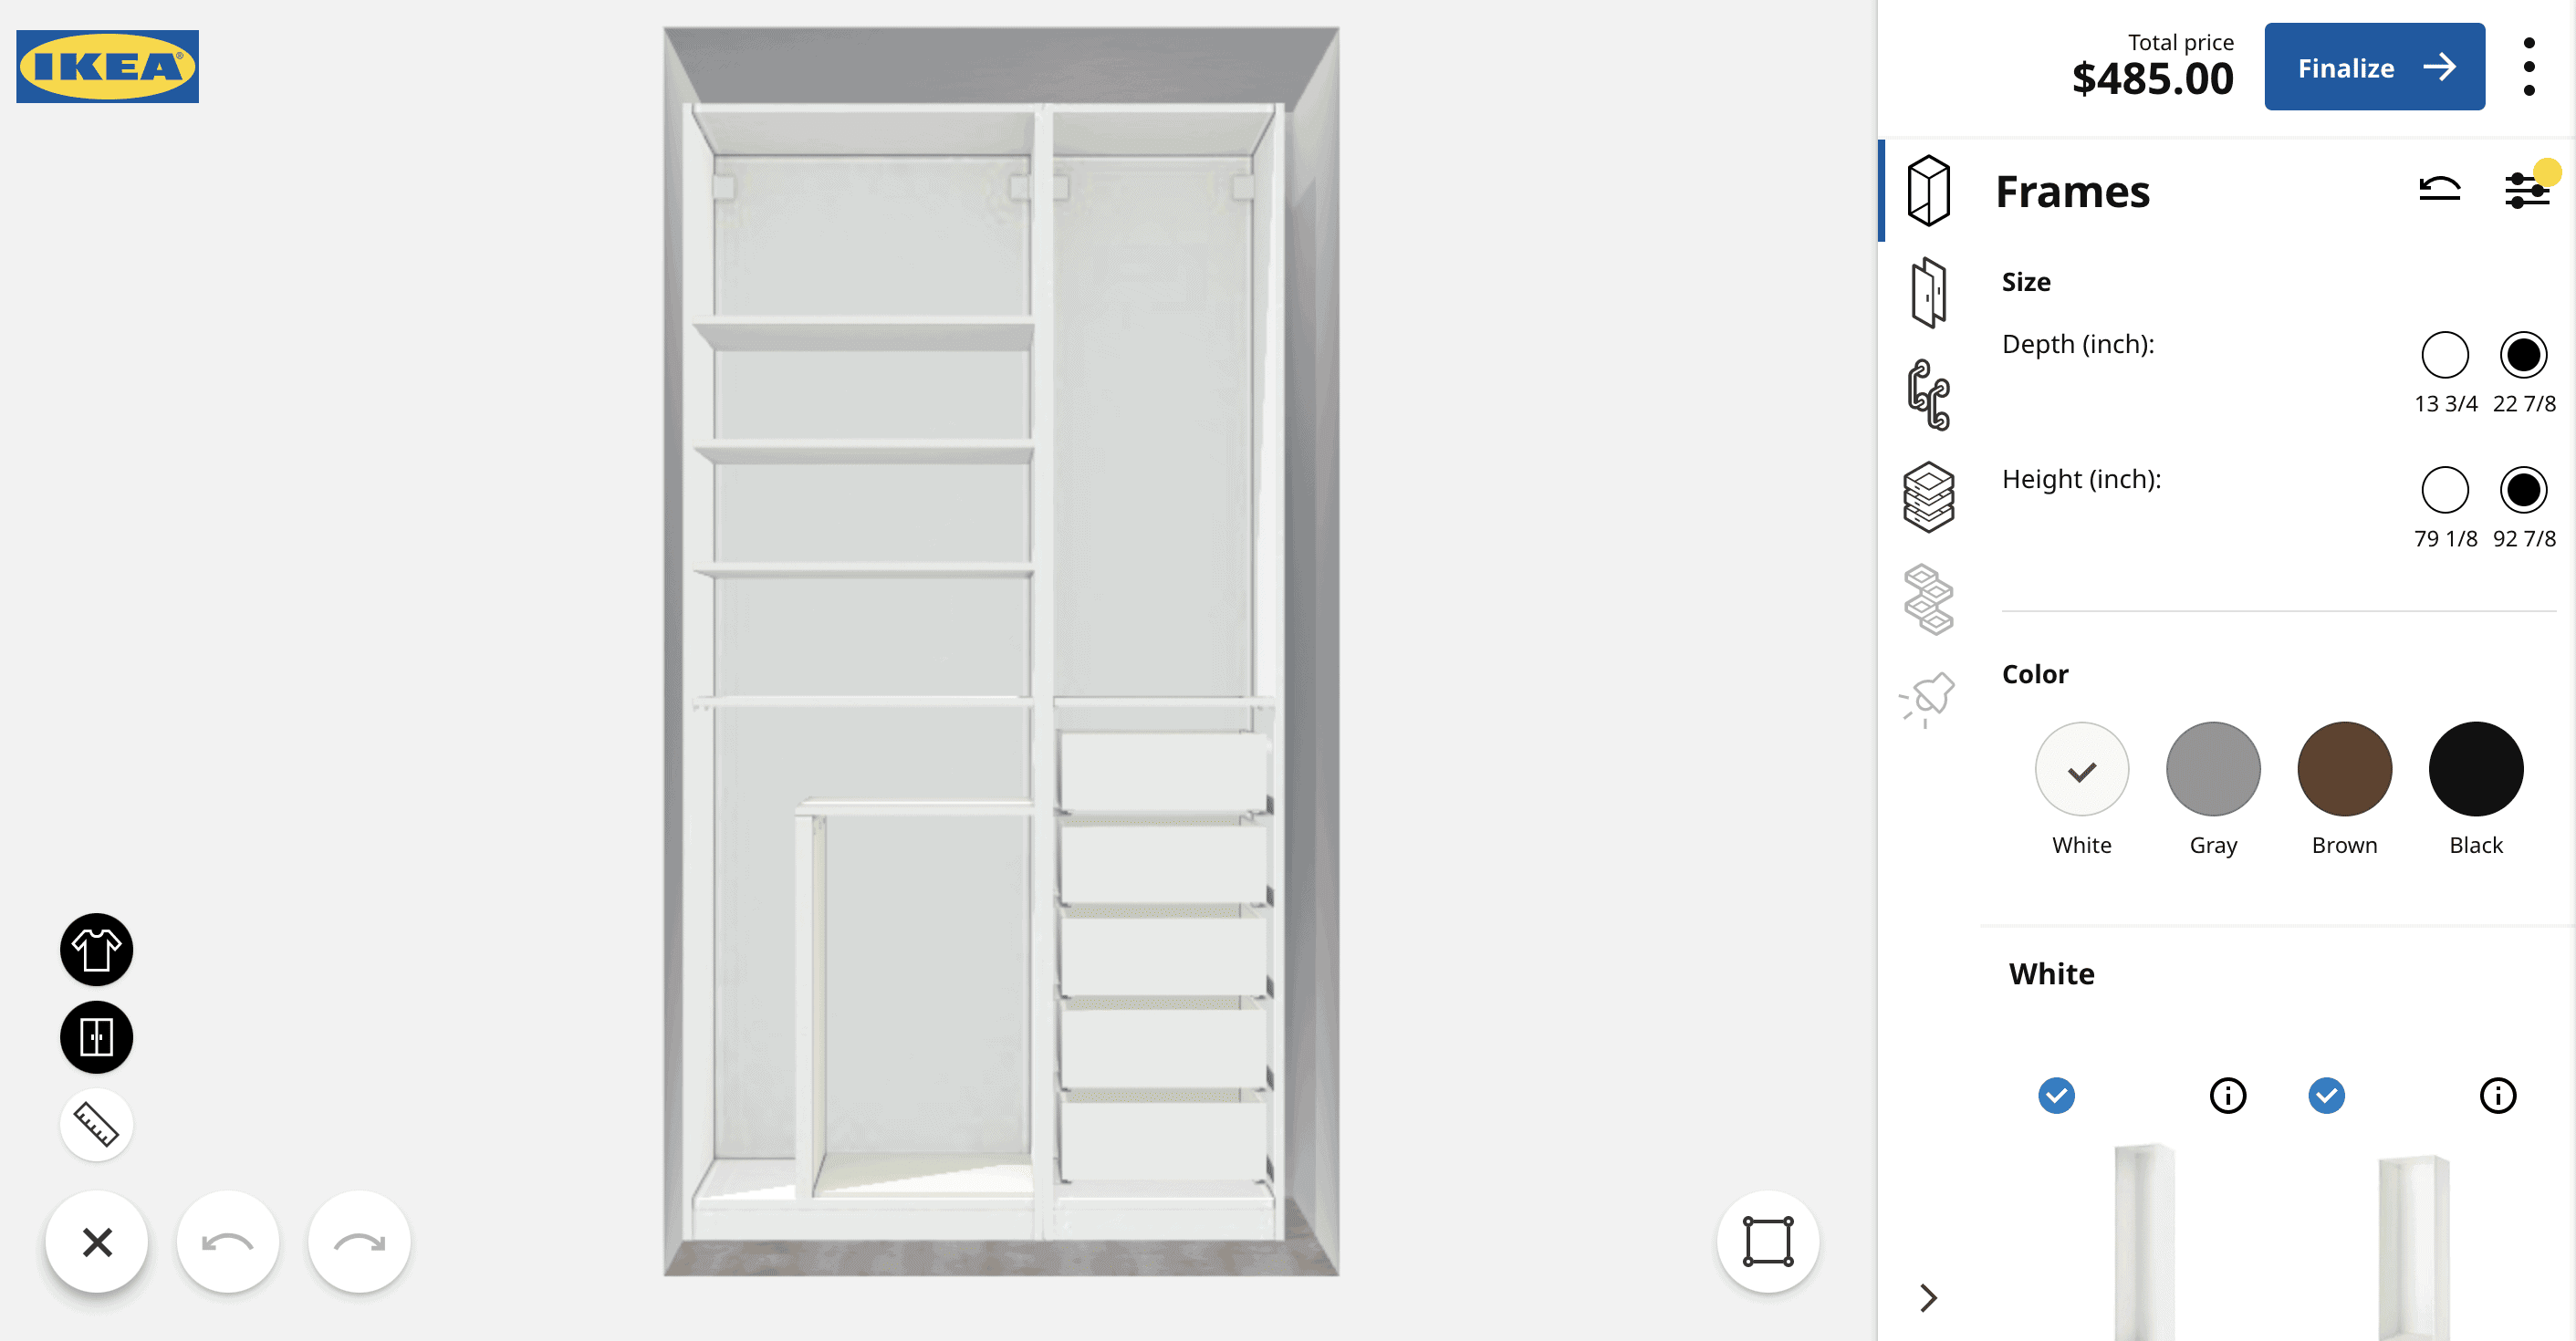 Figuring out our IKEA office closet with their online planning tool